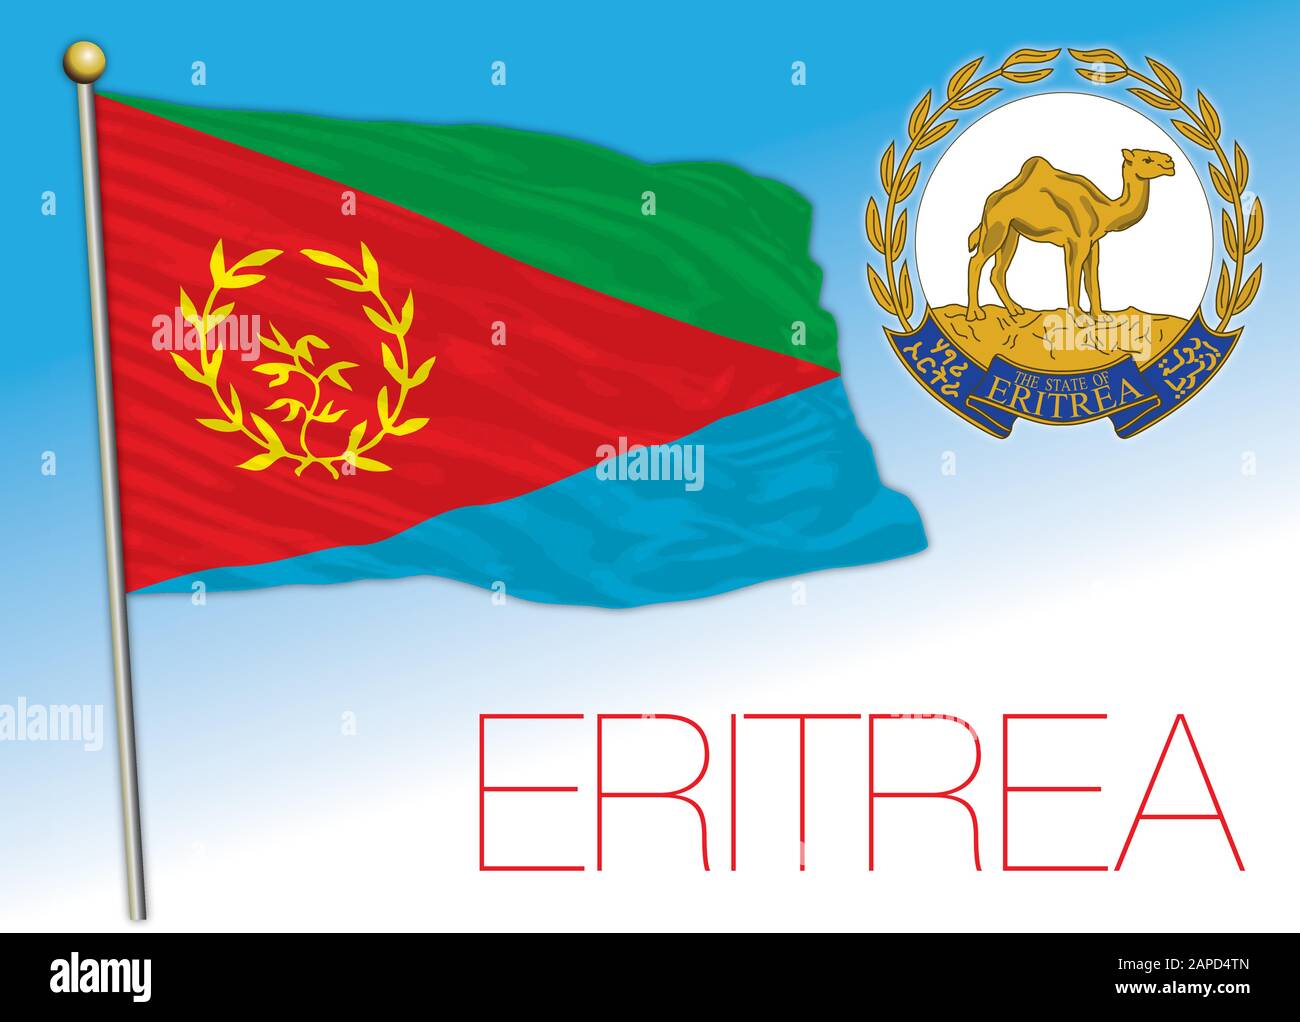 Eritrea official national flag and coat of arms, african country, vector illustration Stock Vector